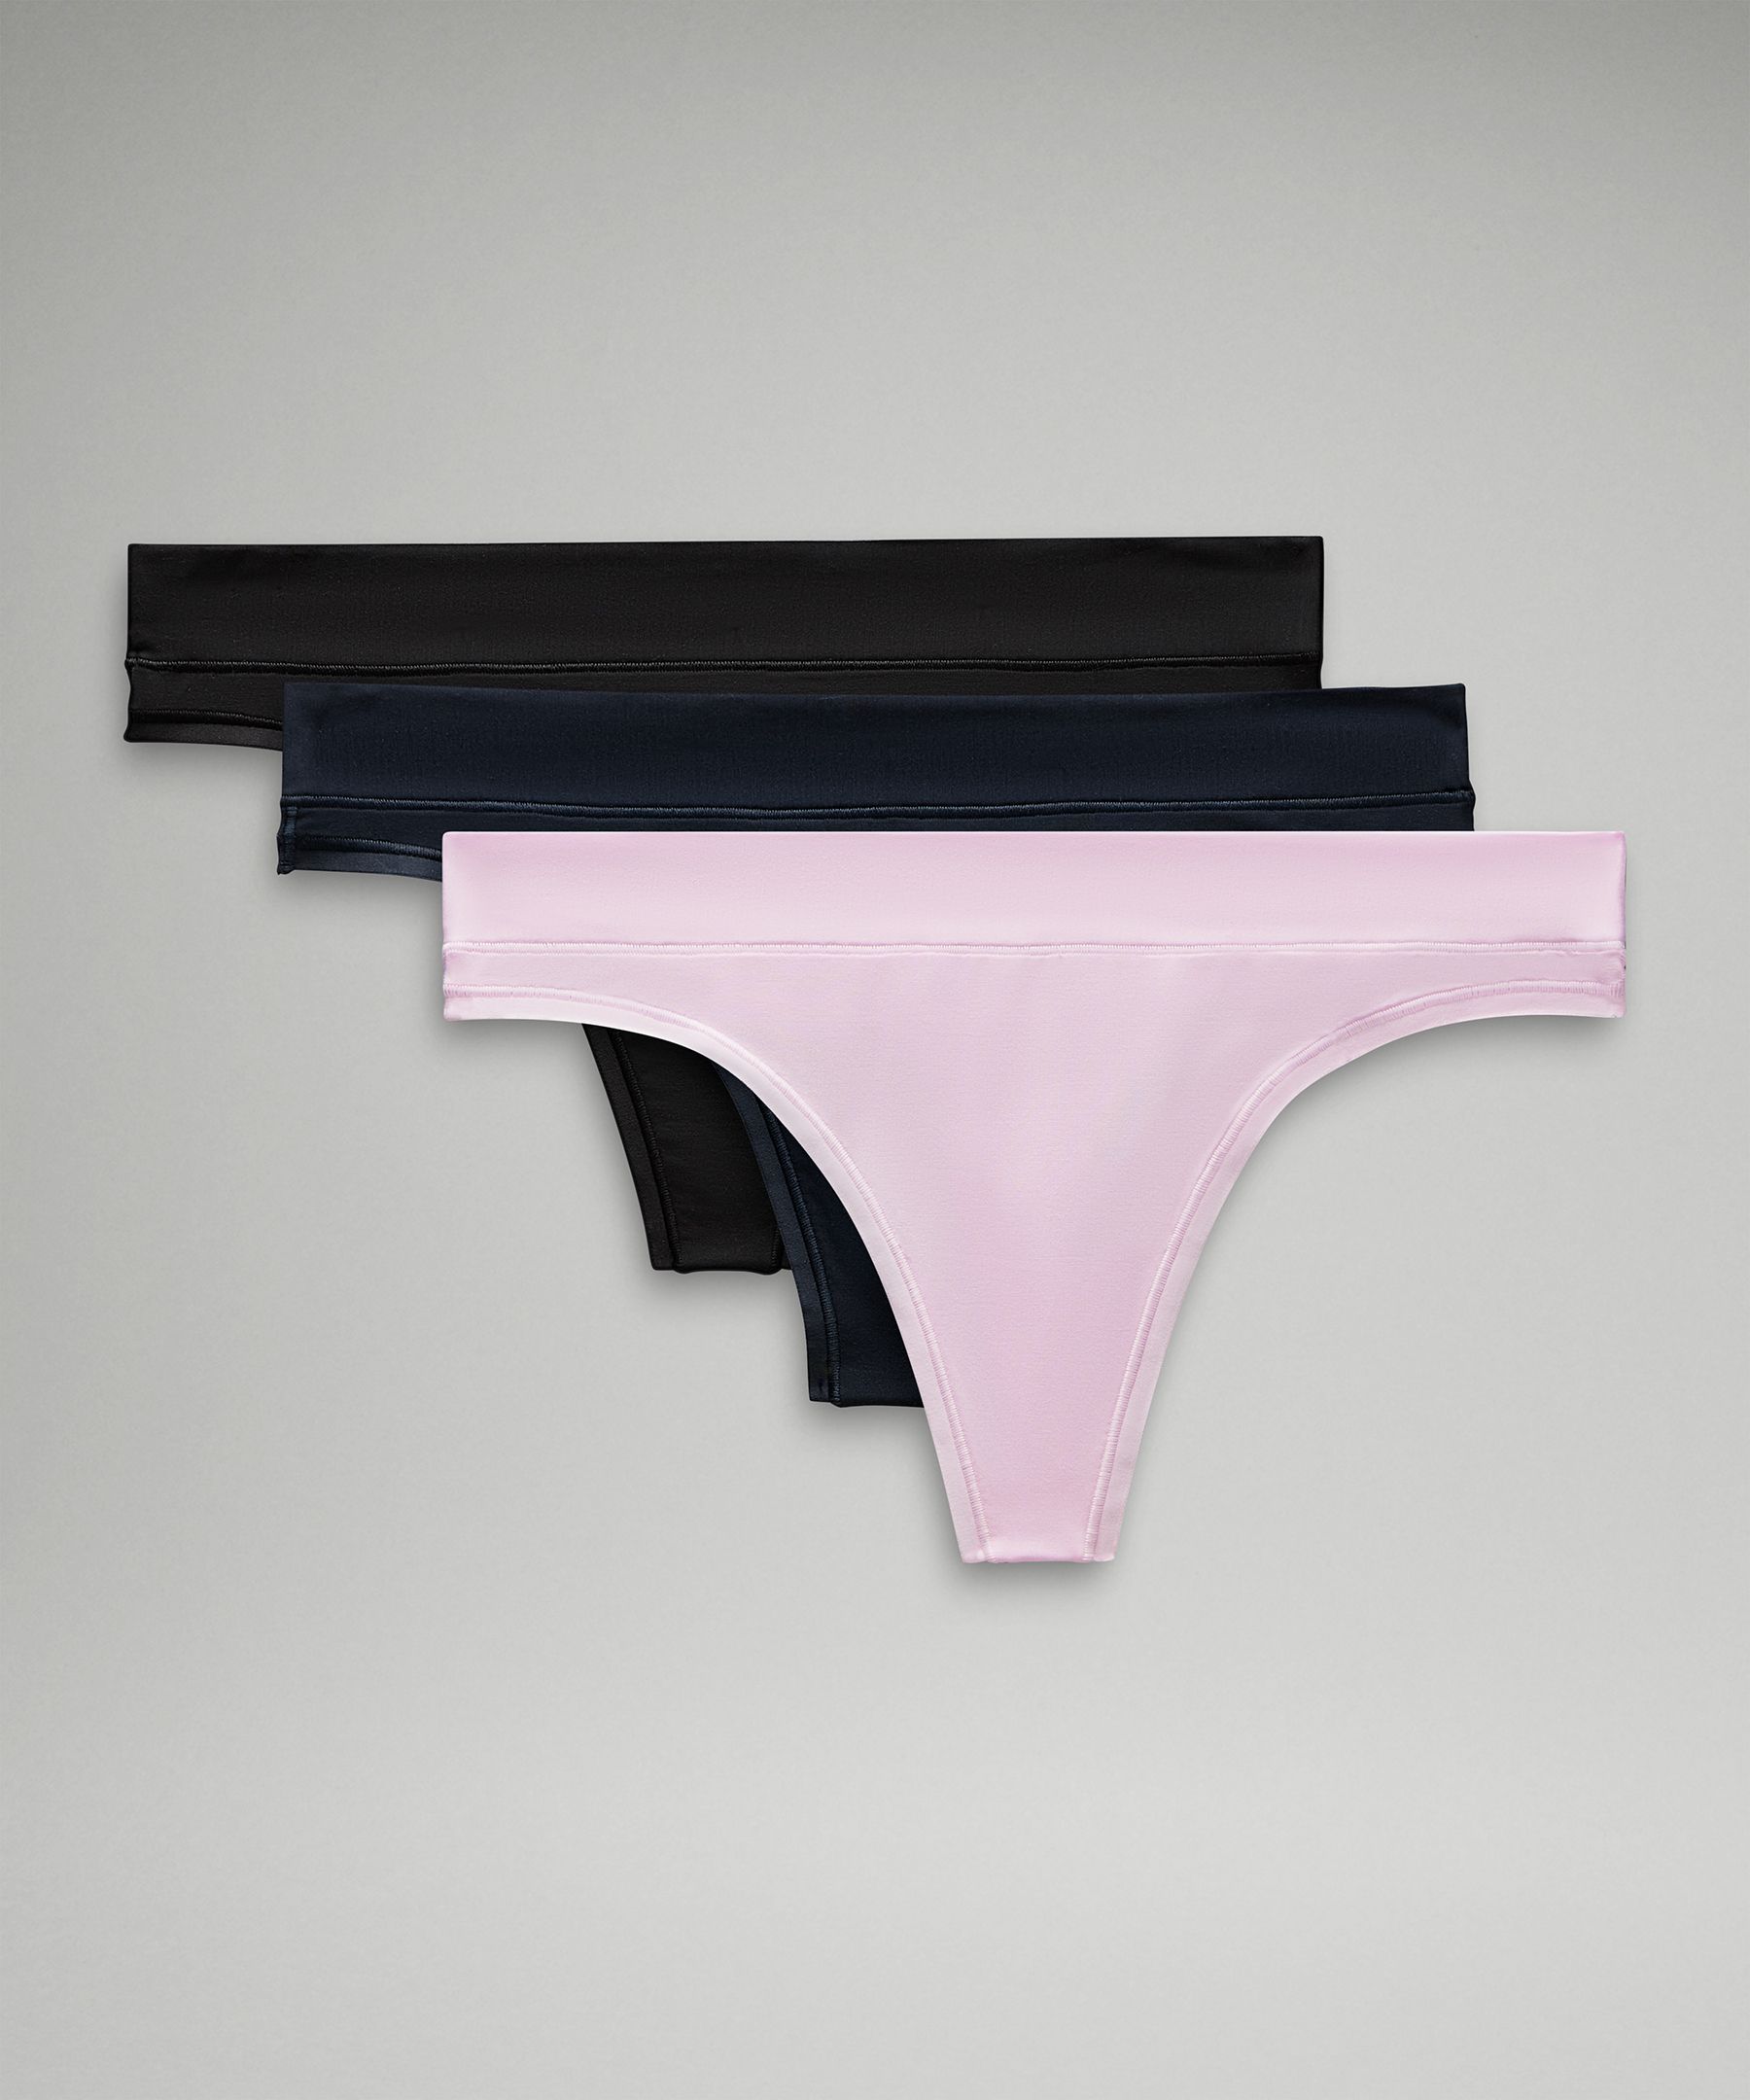 Lululemon Underwear Black Friday South Africa - Pink Taupe Womens